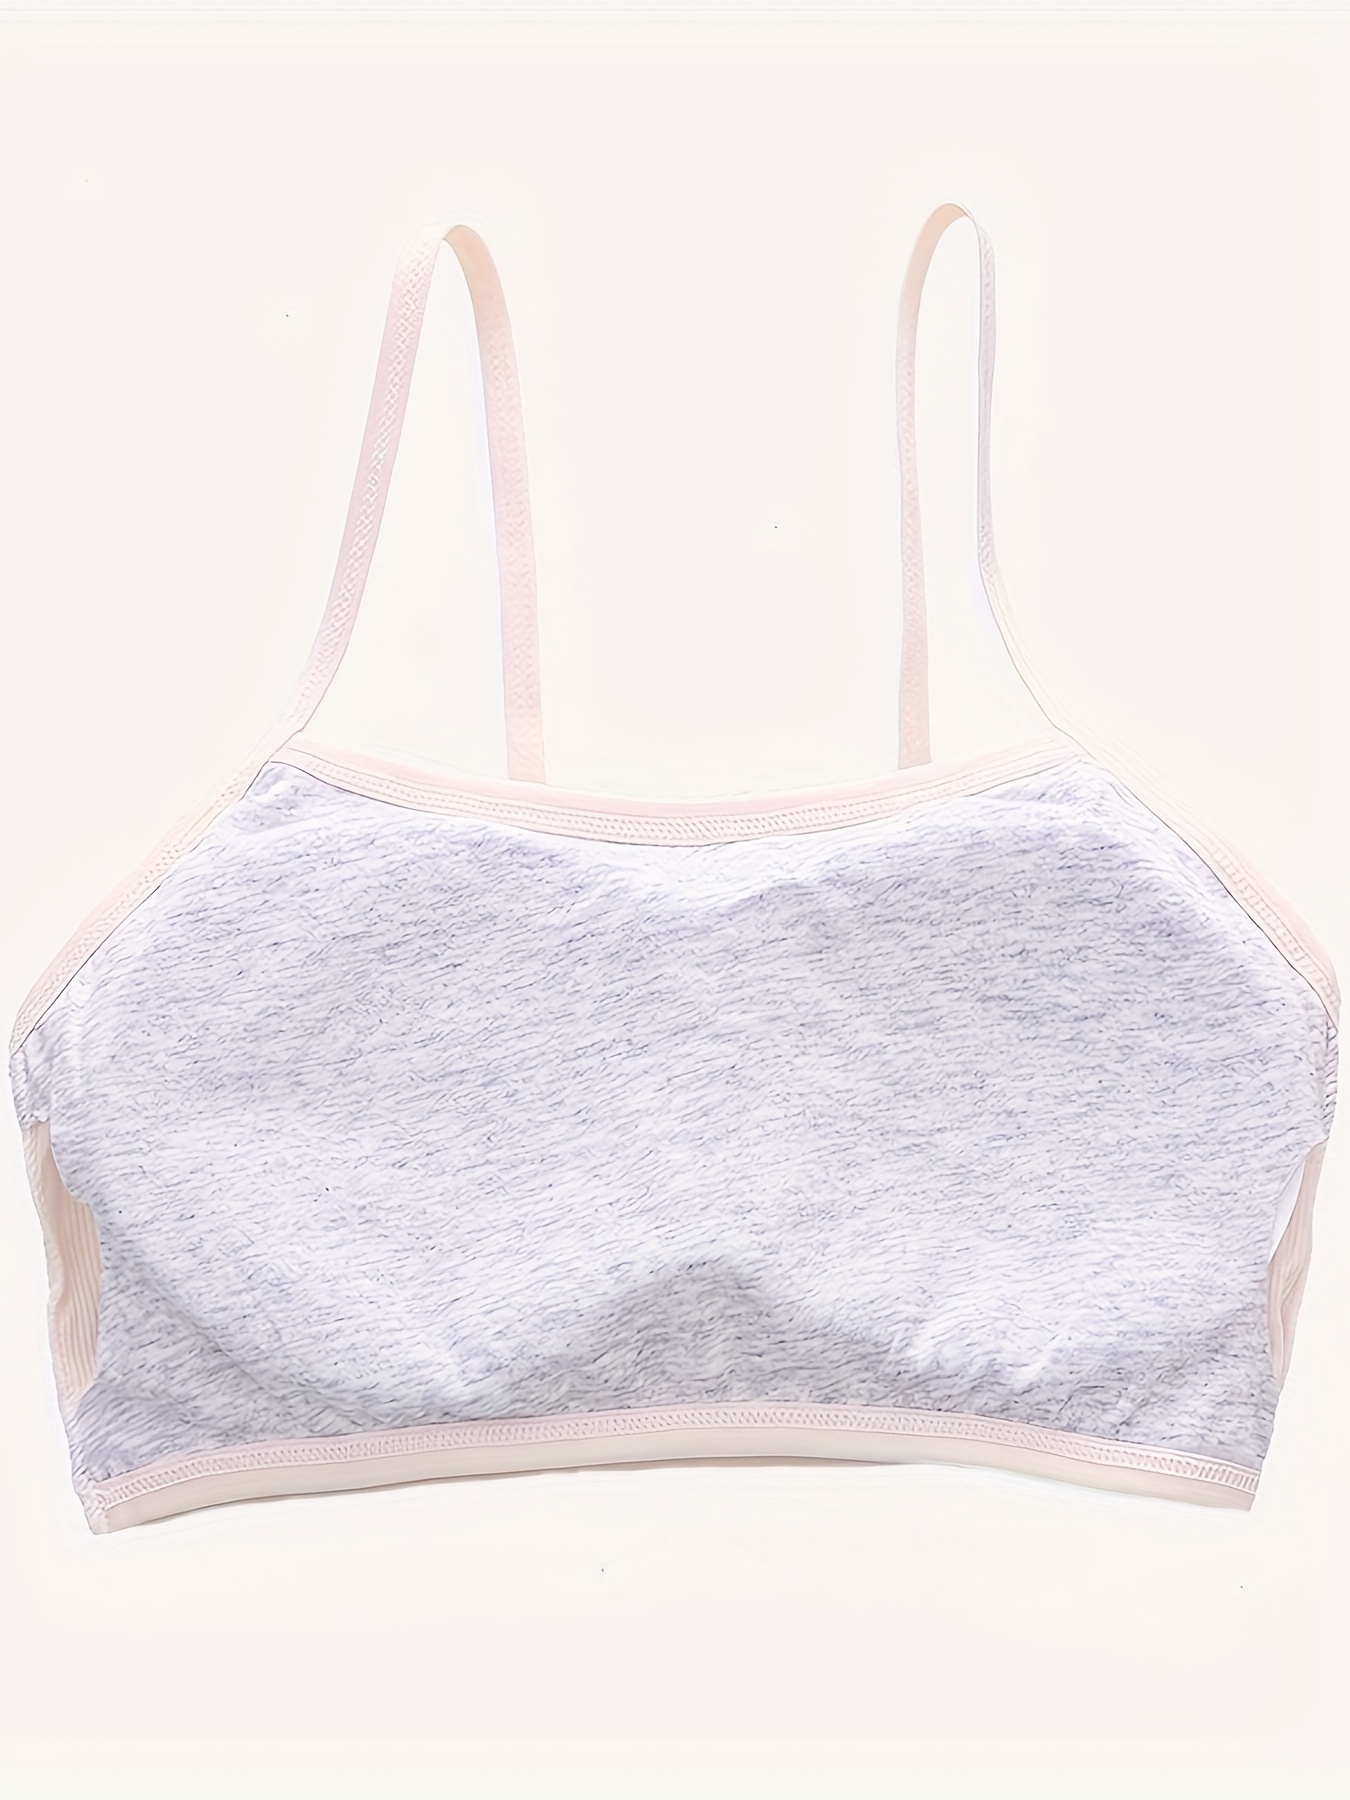 Young Girls Solid Soft Cotton Bra Puberty Teenage Breathable Underwear Sport  Training Bras for 8 9